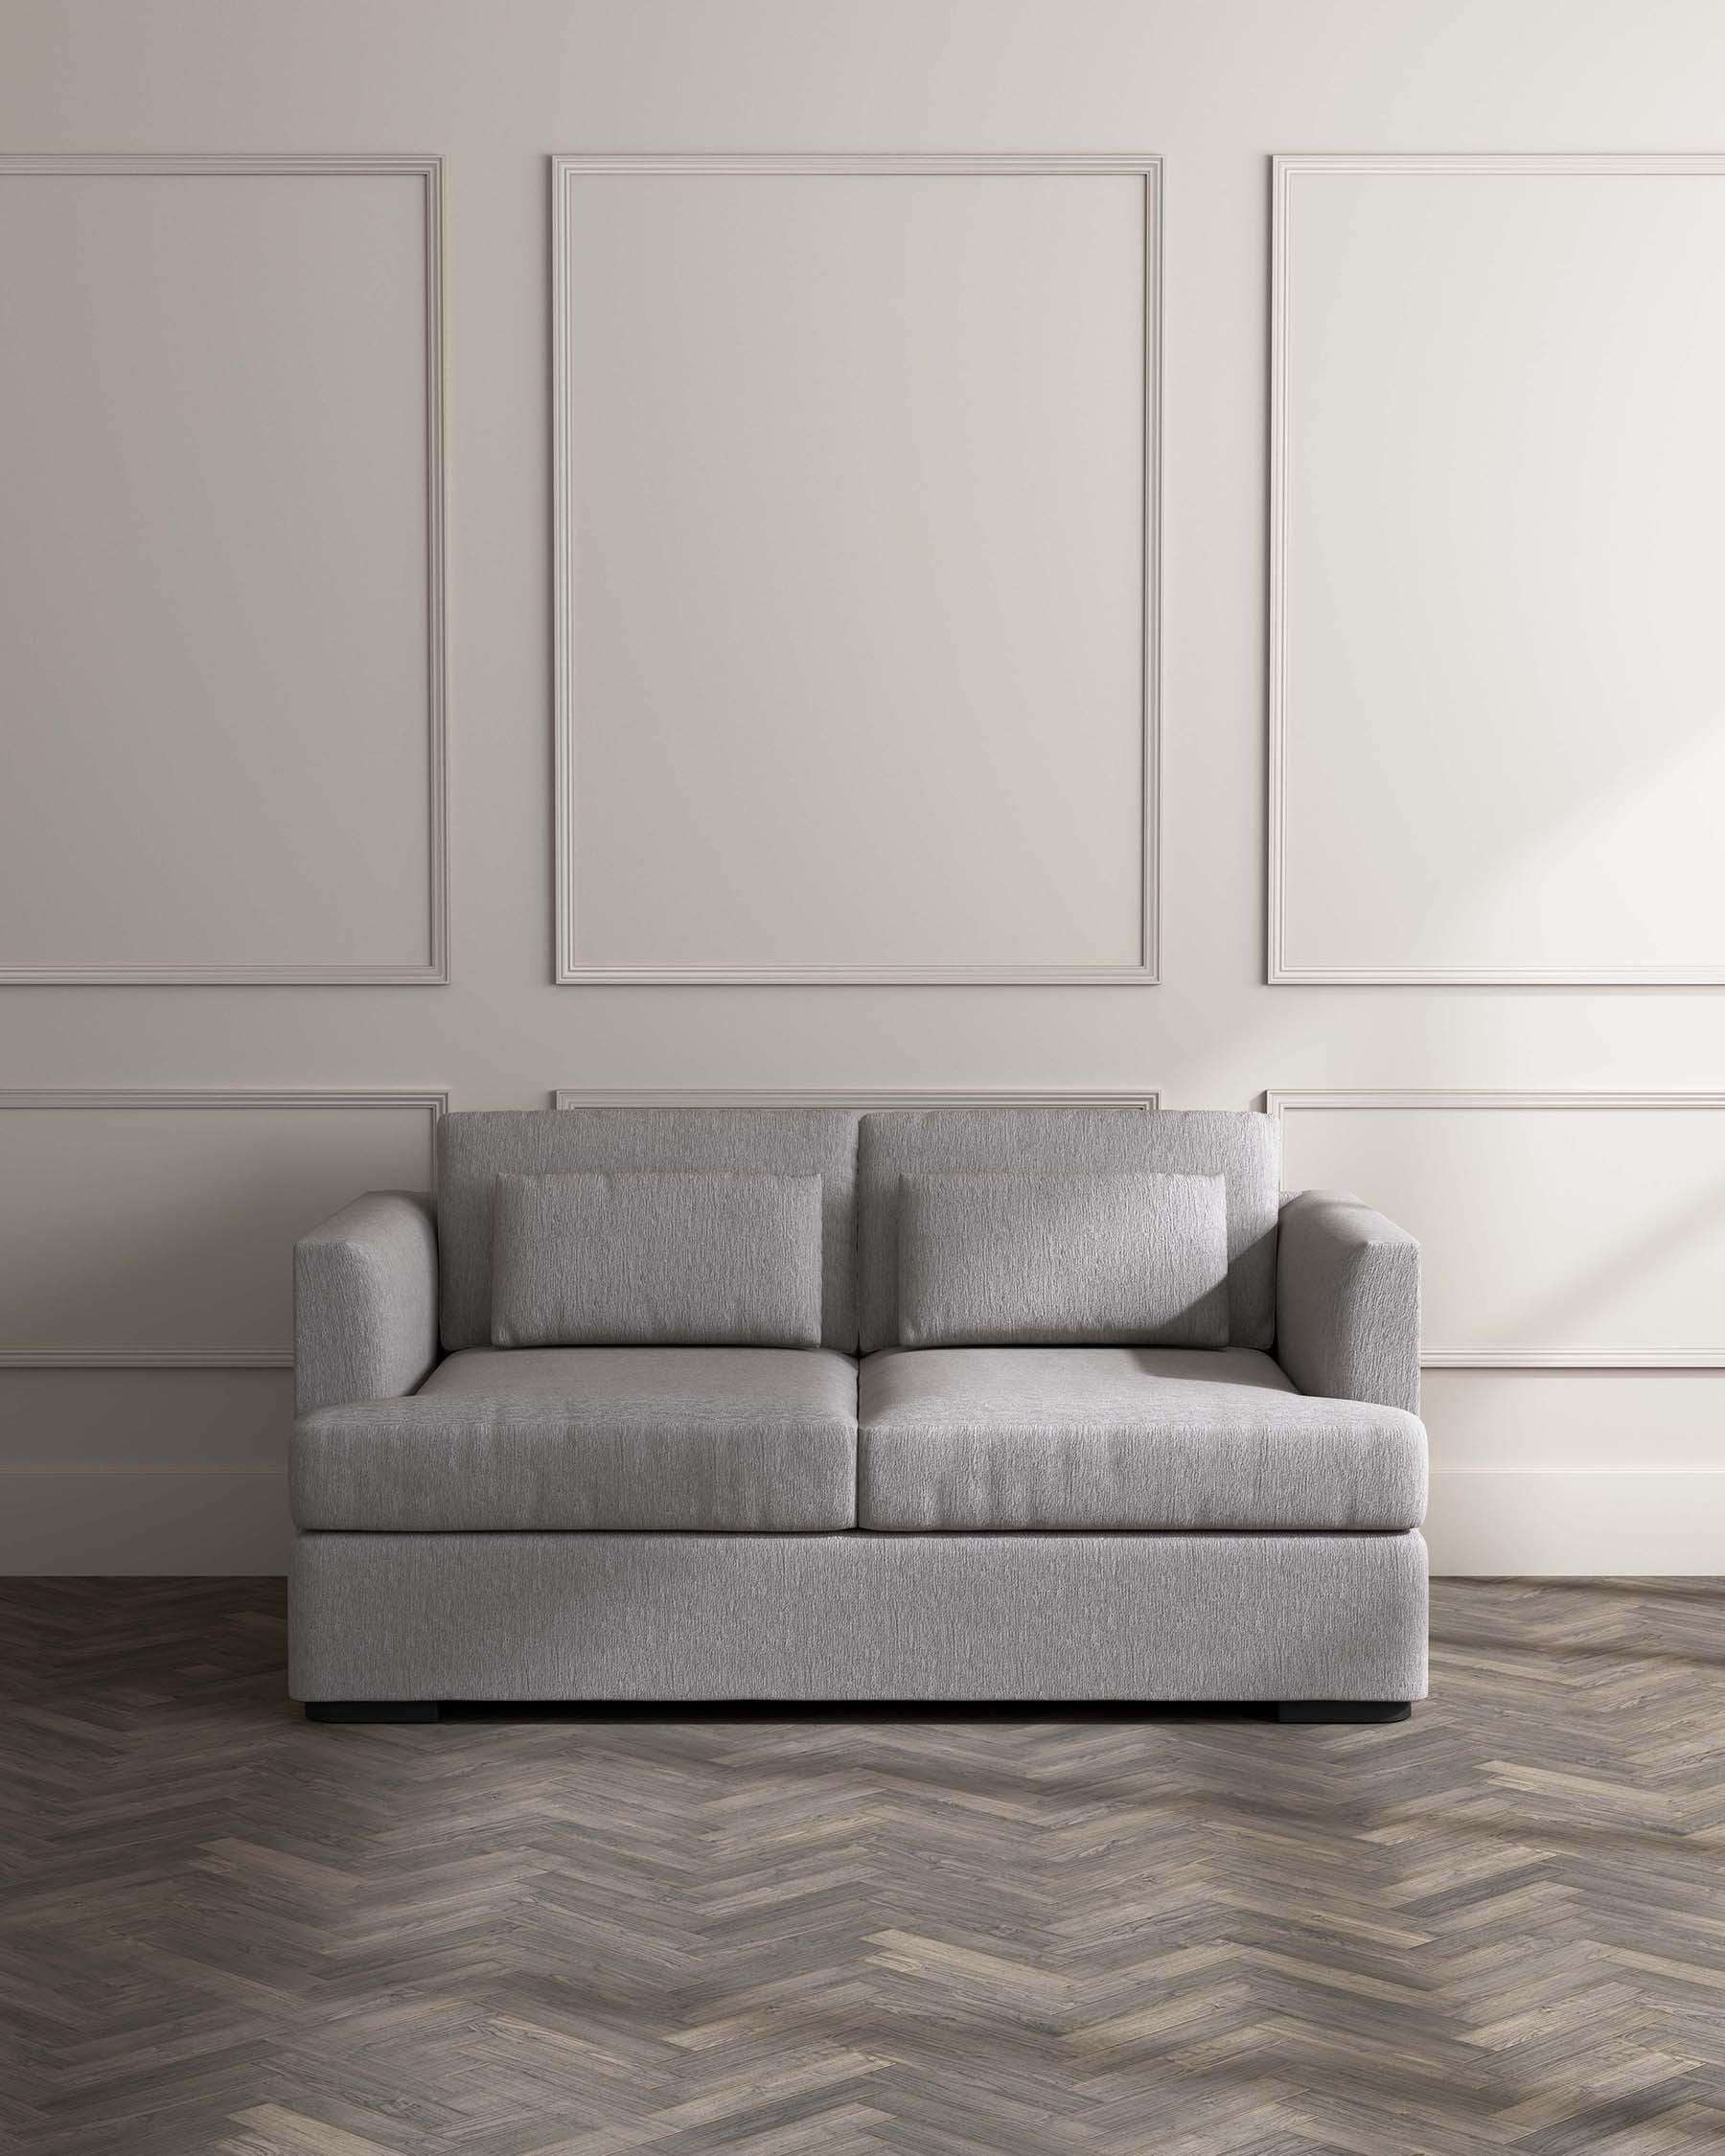 Ashby 2 Seater Sofa Mid Grey Weave With Black Wood Legs